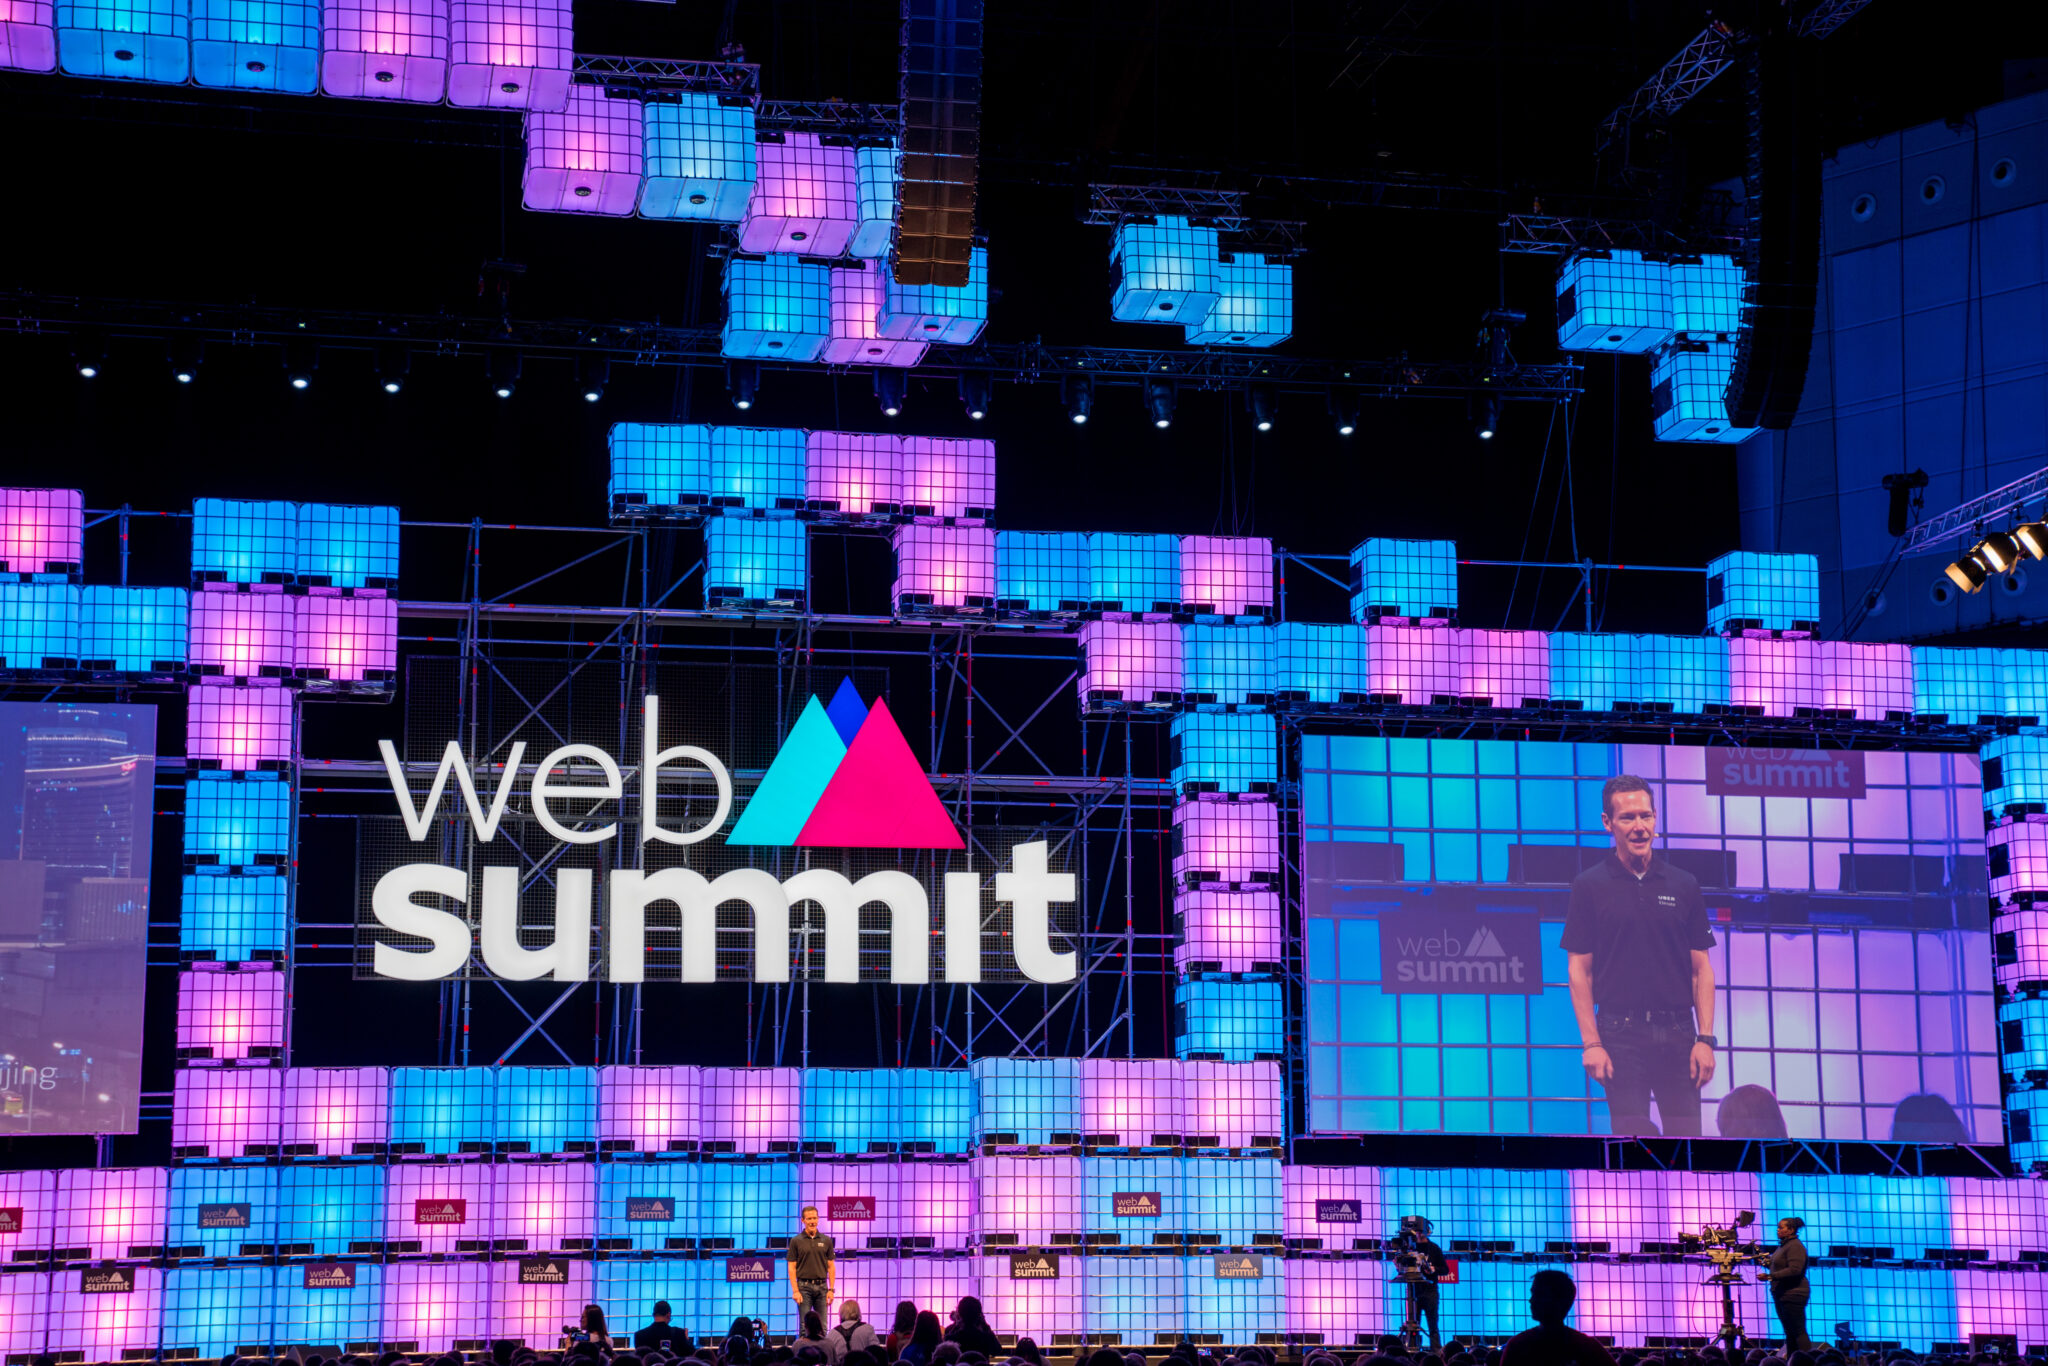 LISBON, PORTUGAL - NOVEMBER 08, 2017: Europe's biggest tech conference, the Web Summit